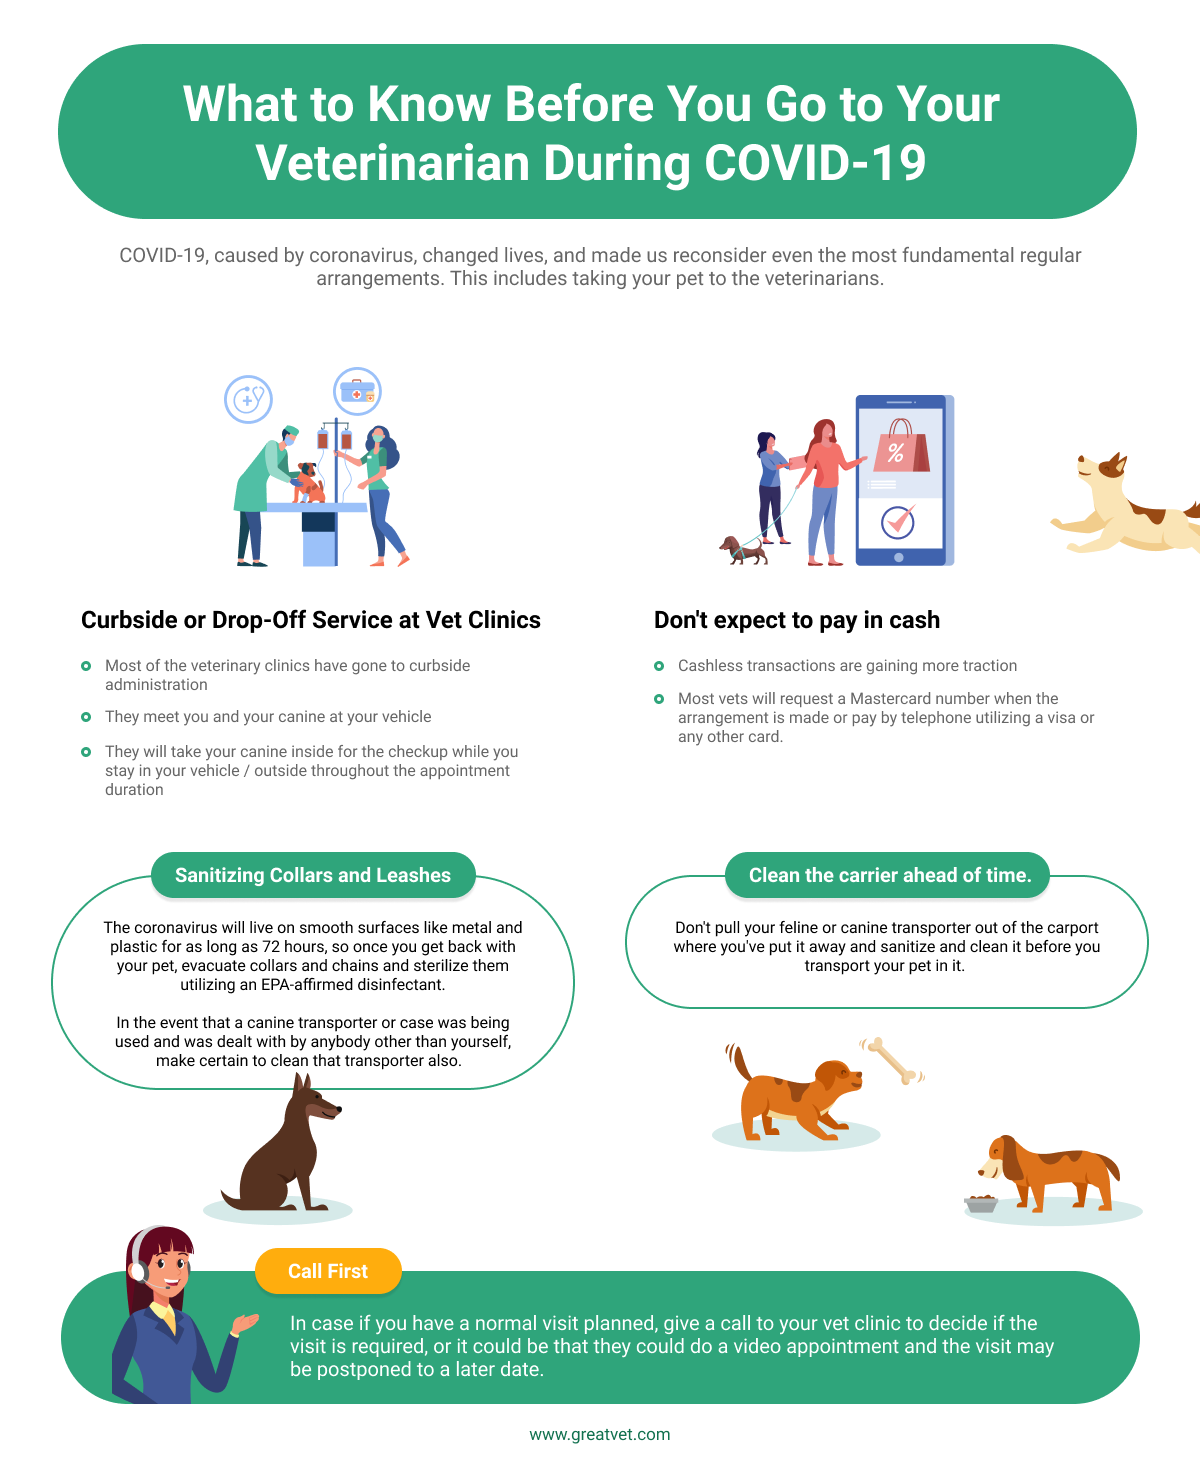 What to Know Before You Go to Your Veterinarian During COVID-19 Infographic - GreatVet